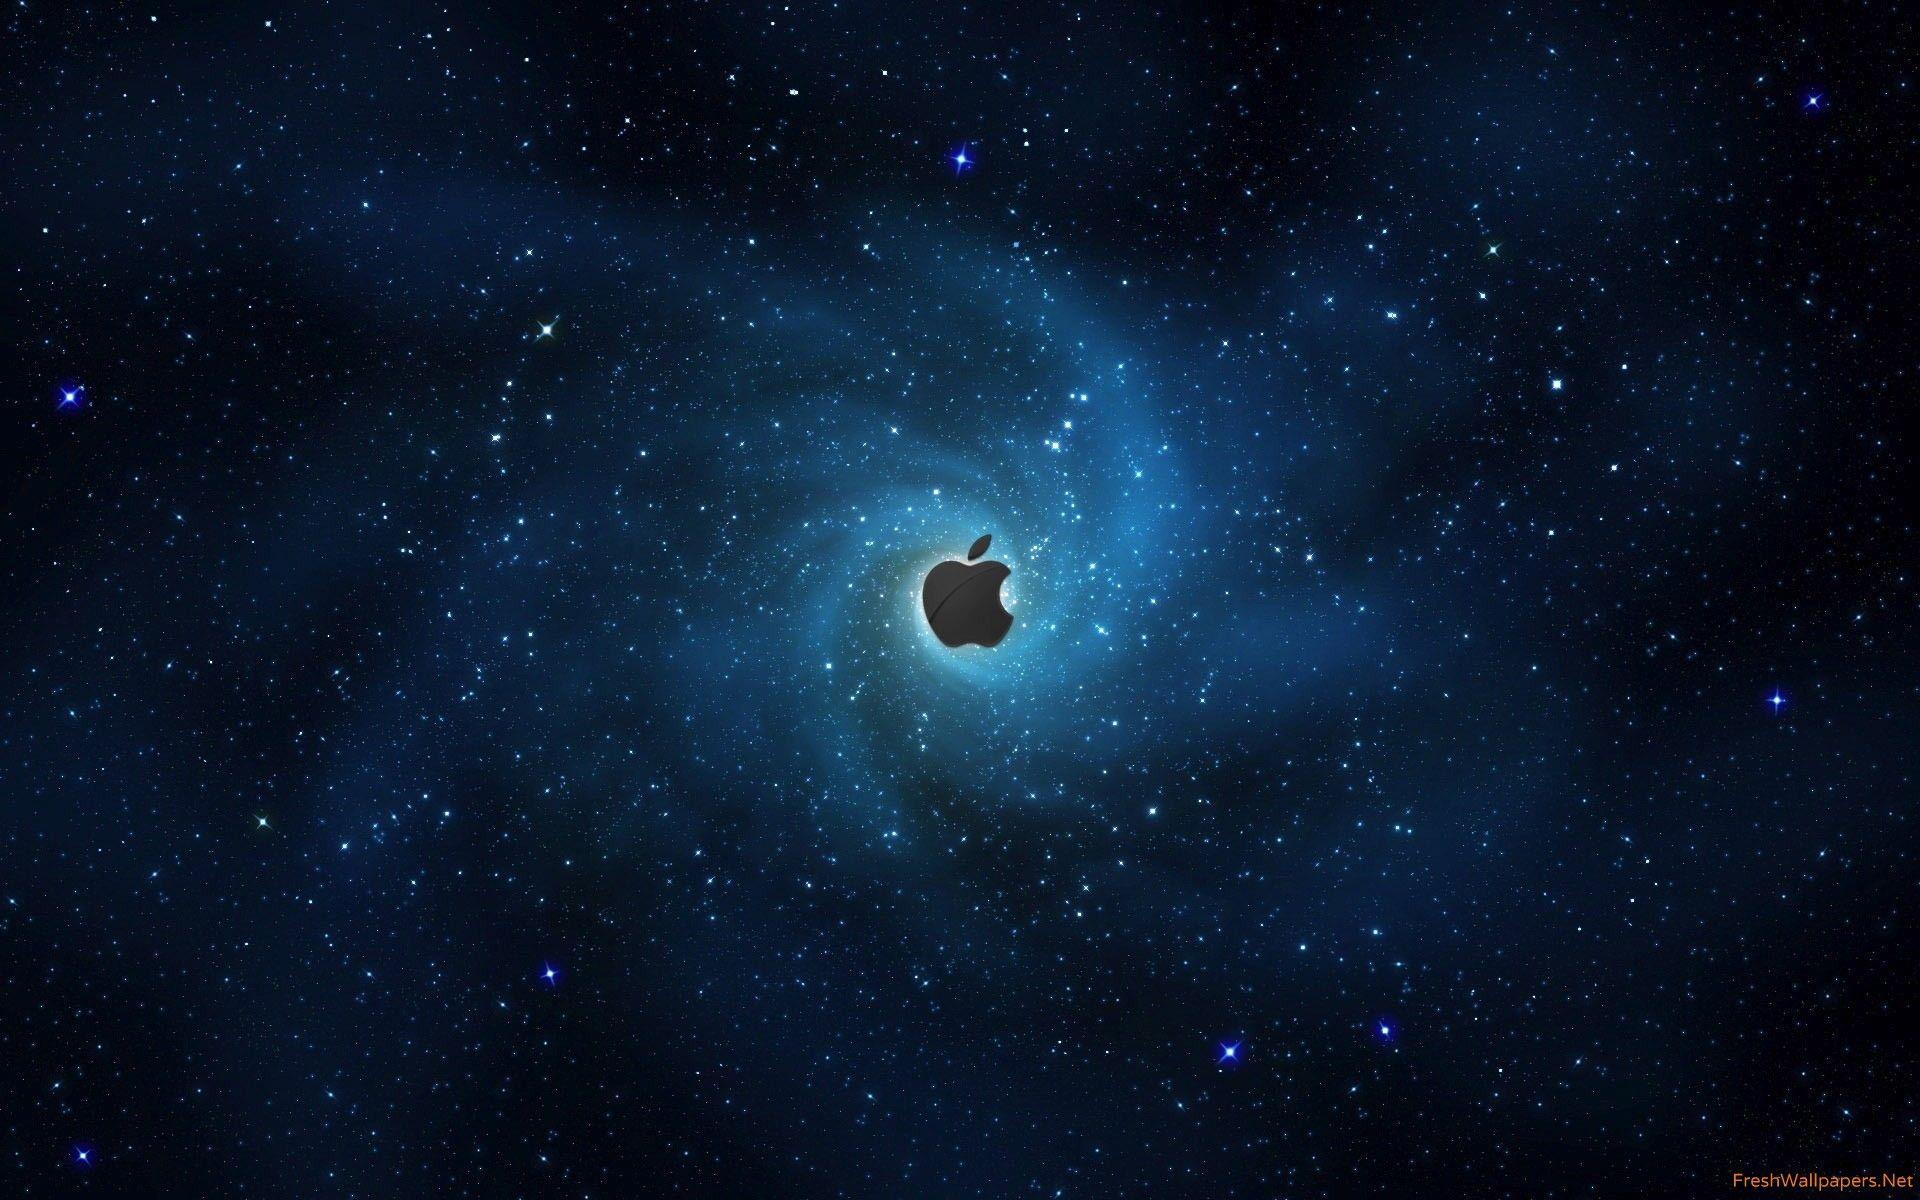 Apple Galaxy Logo - Apple logo with Stars and Galaxy wallpapers | Freshwallpapers